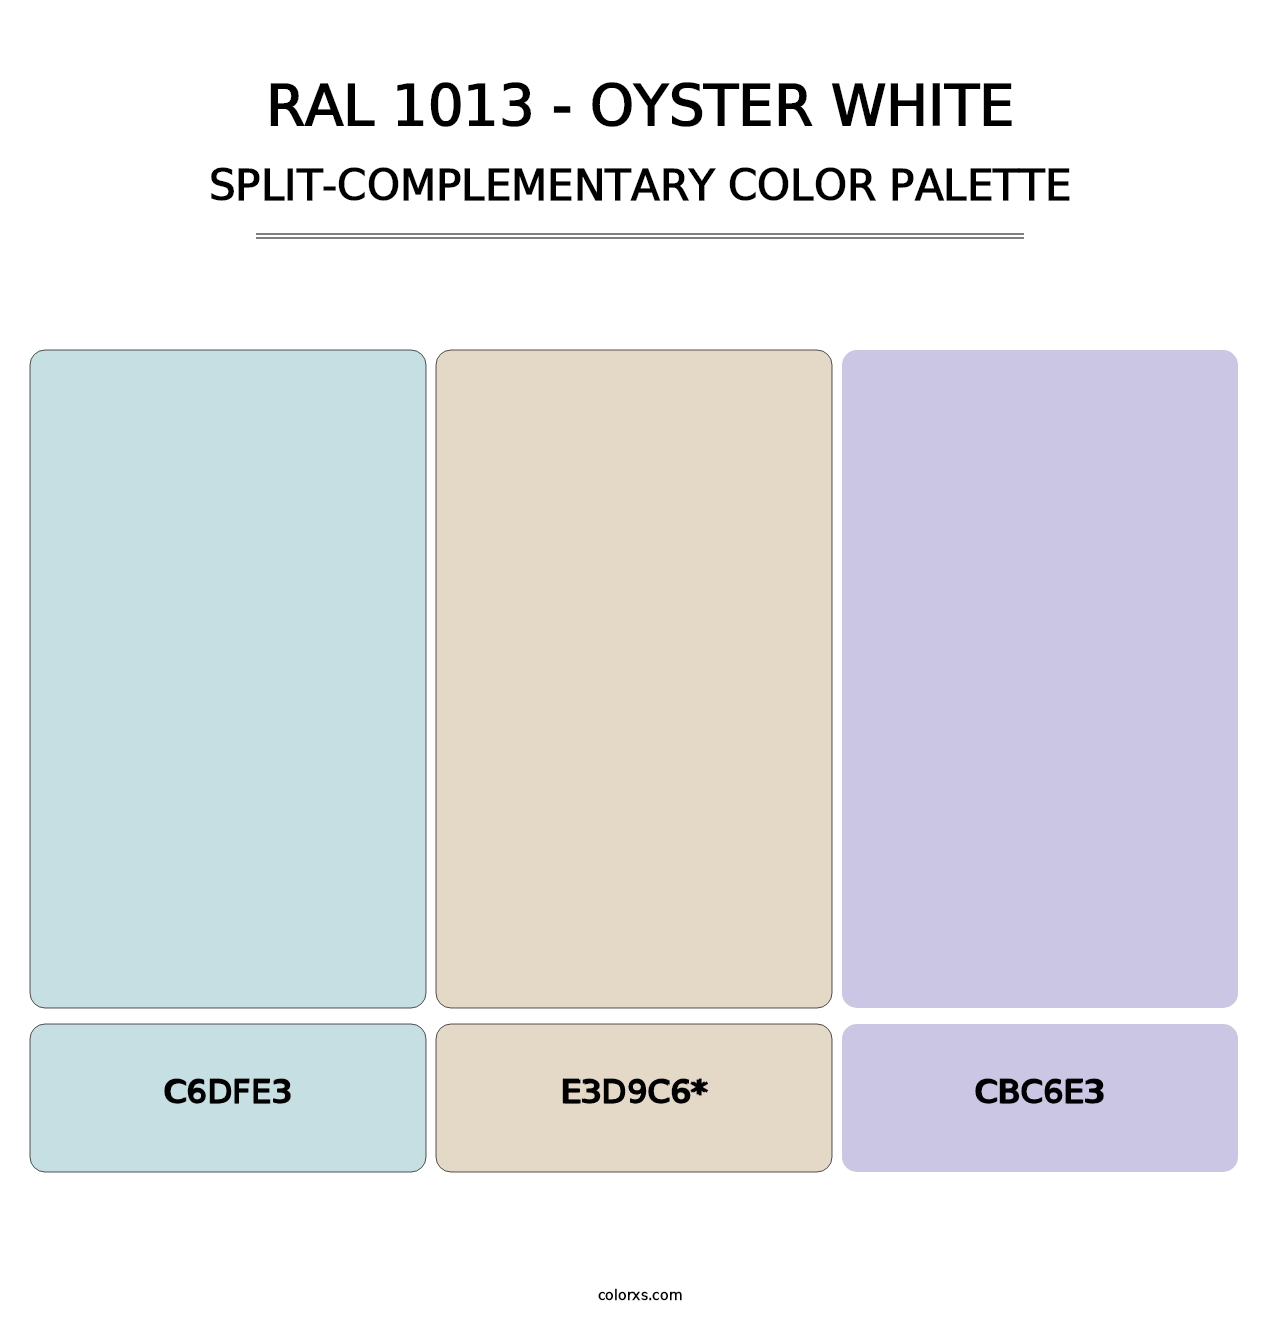 RAL 1013 - Oyster White - Split-Complementary Color Palette